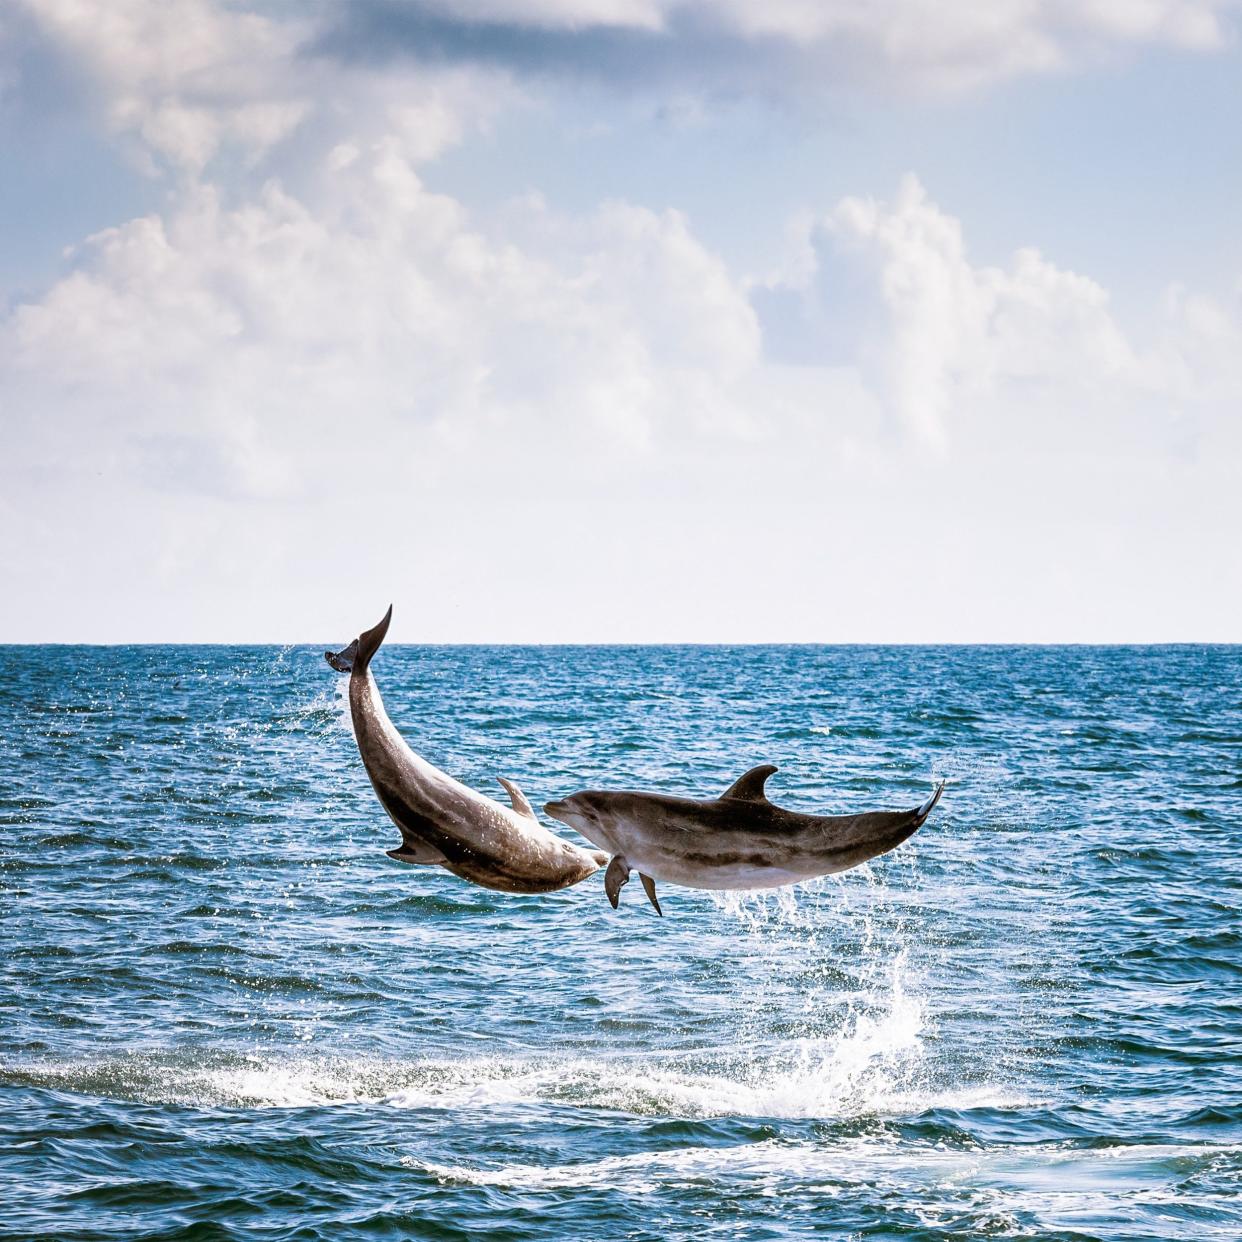 Two dolphins leaping into the air in the Bay of Islands, off New Zealand's Northland coast. - Getty Images Contributor